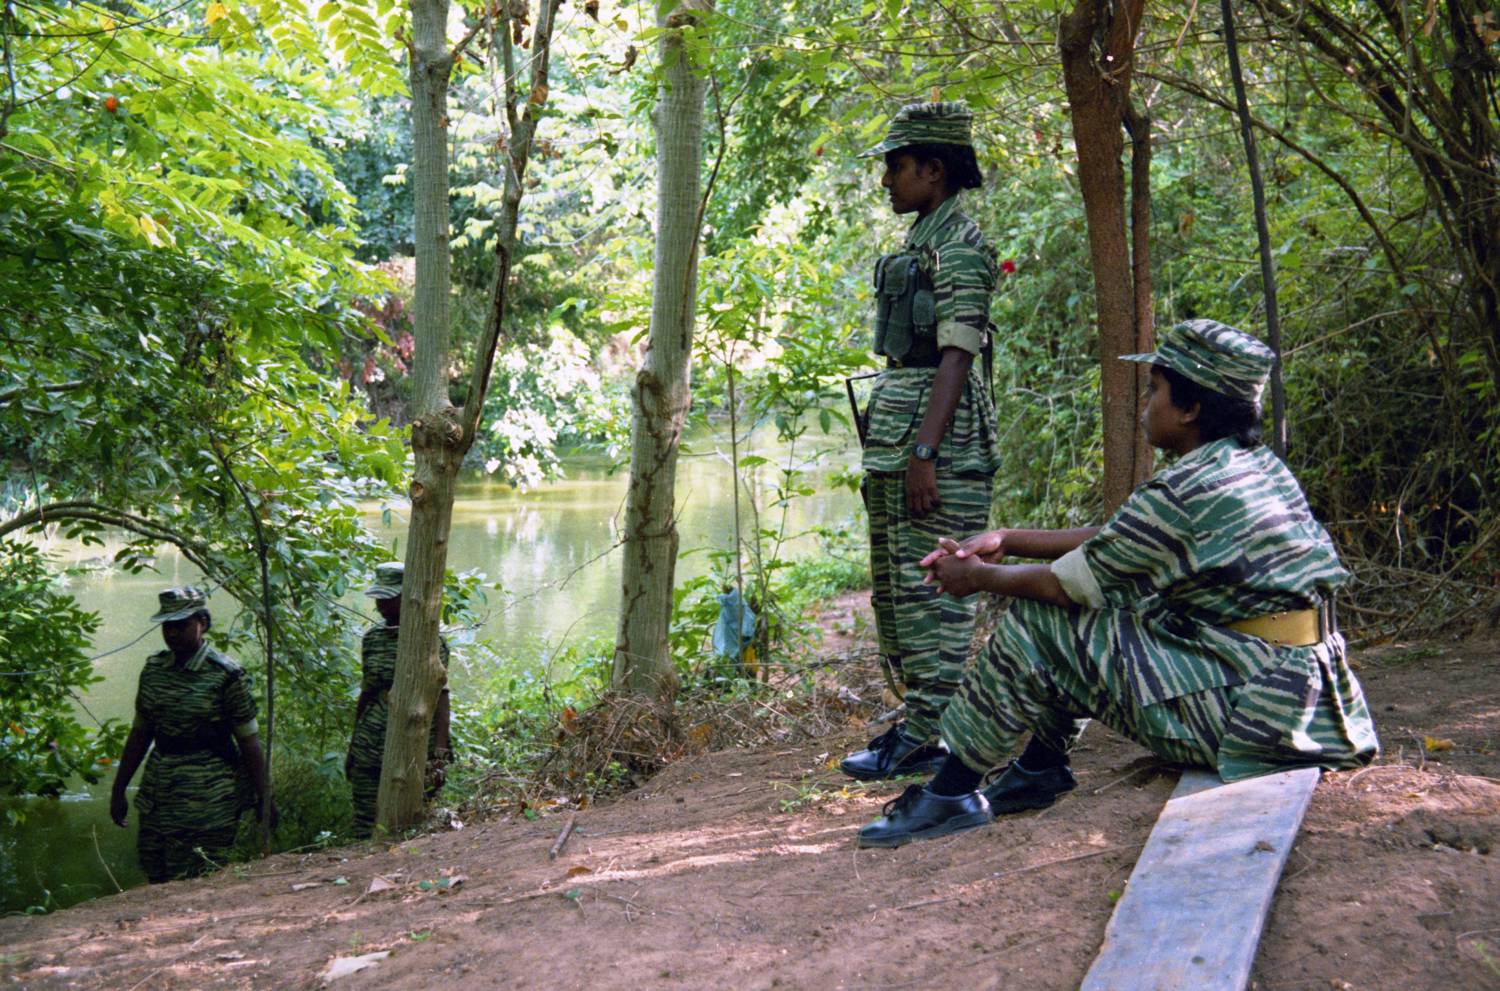 Women of the Liberation Tigers of Tamil Eelam. CC-BY Salix Oculus via Wikimedia Commons